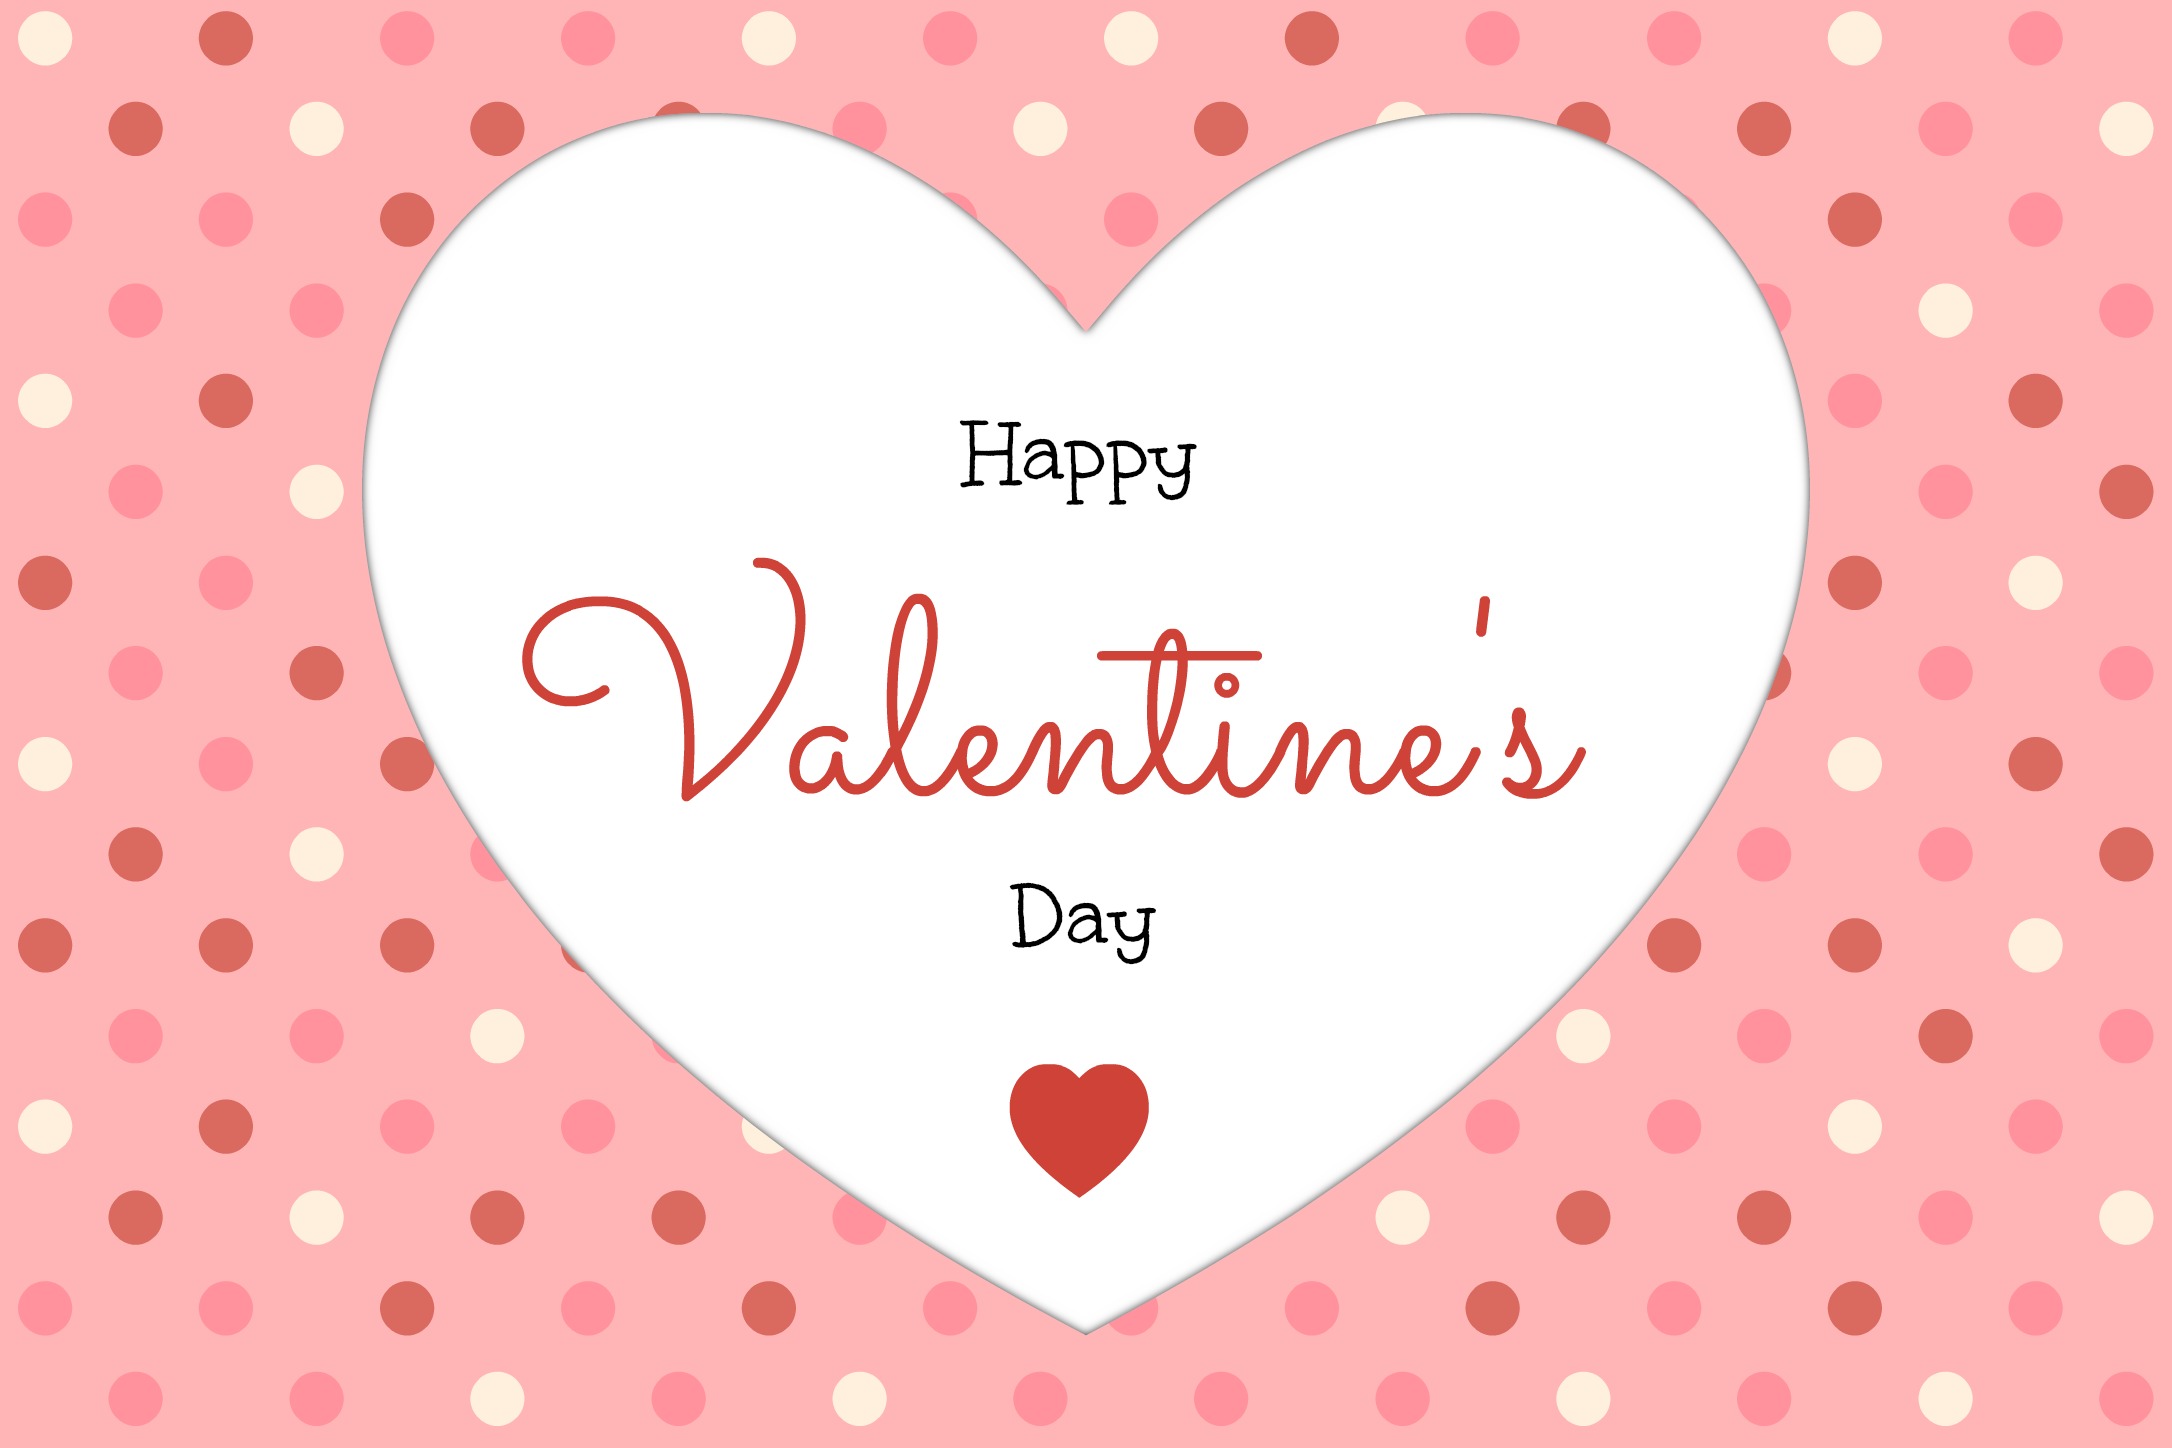 happy valentines day card 2015 hd 4k background wallpapers